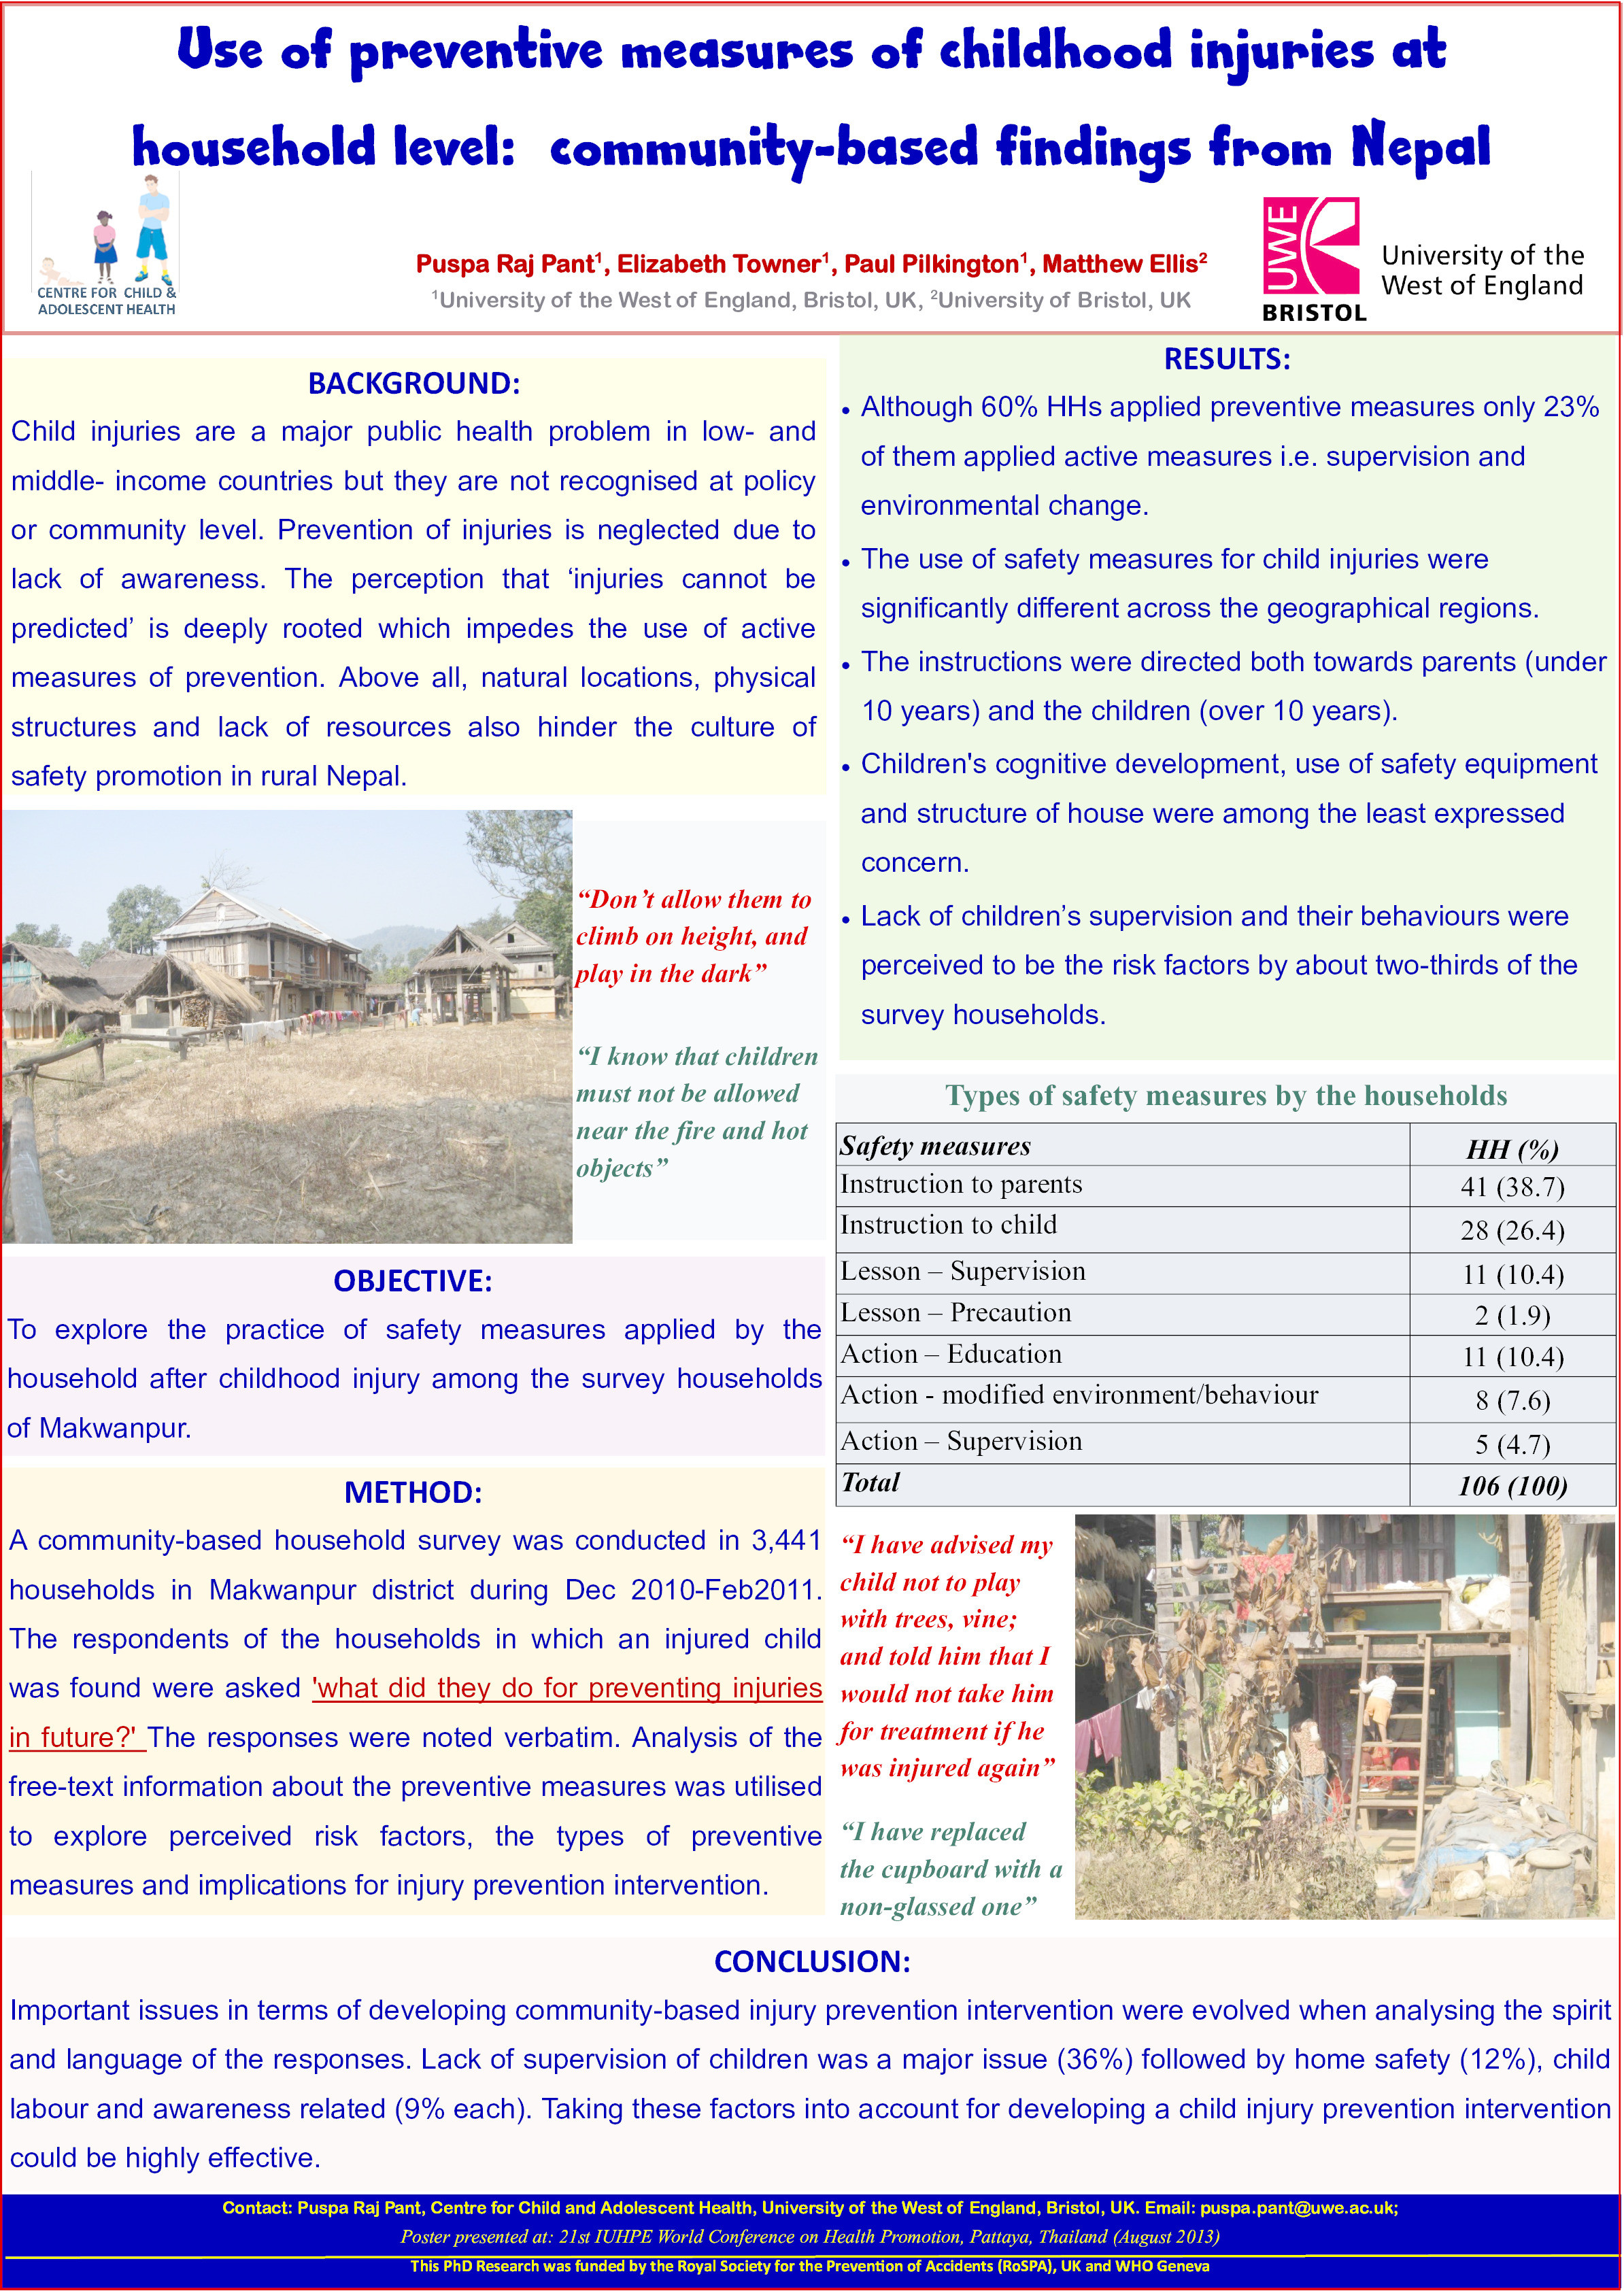 Use of preventive measures of childhood injuries at household level: Community-based findings from Nepal Thumbnail